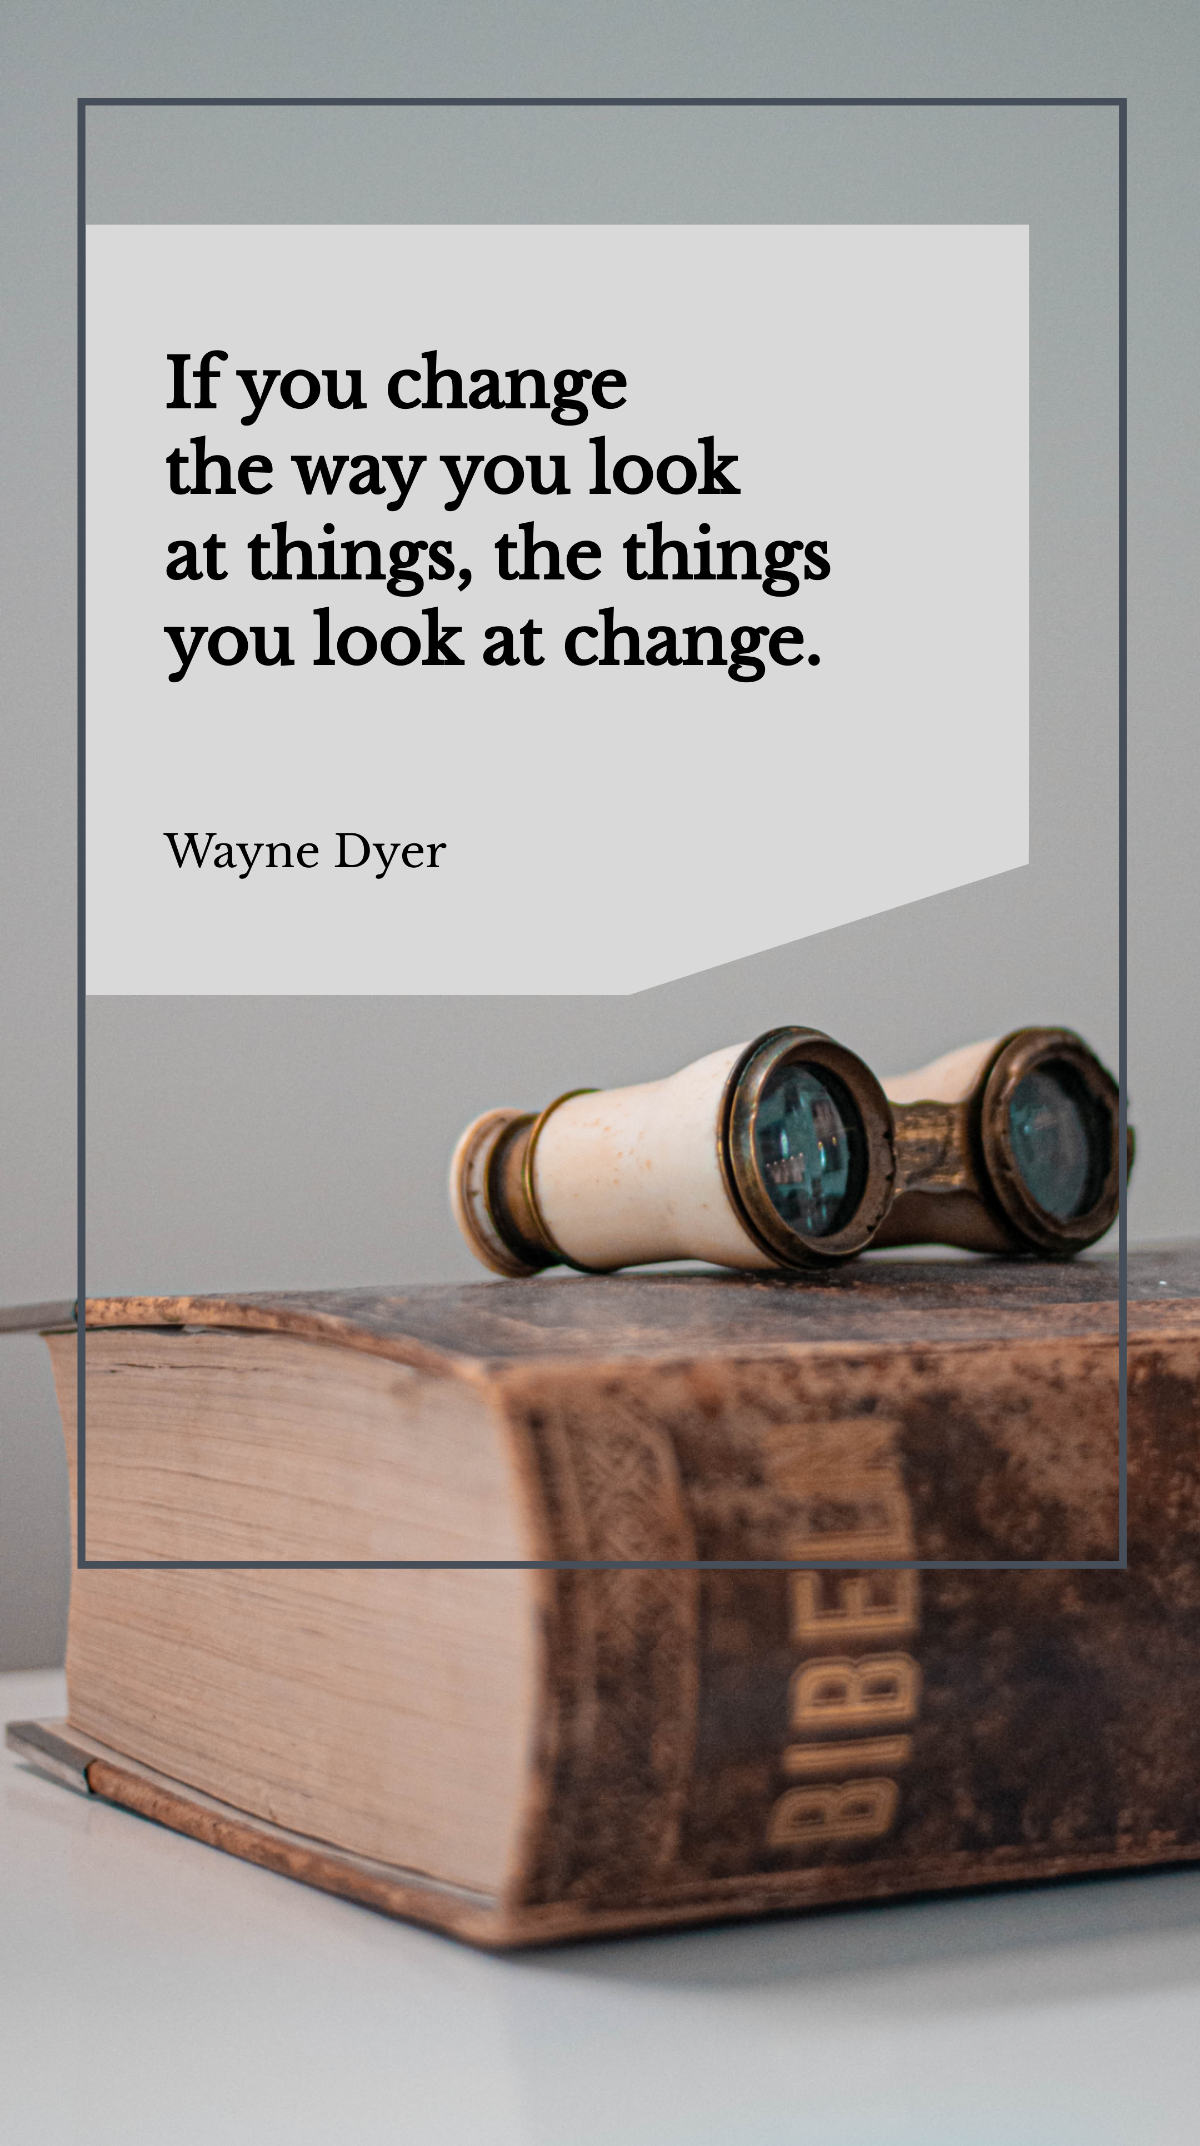 Wayne Dyer - If you change the way you look at things, the things you look at change Template